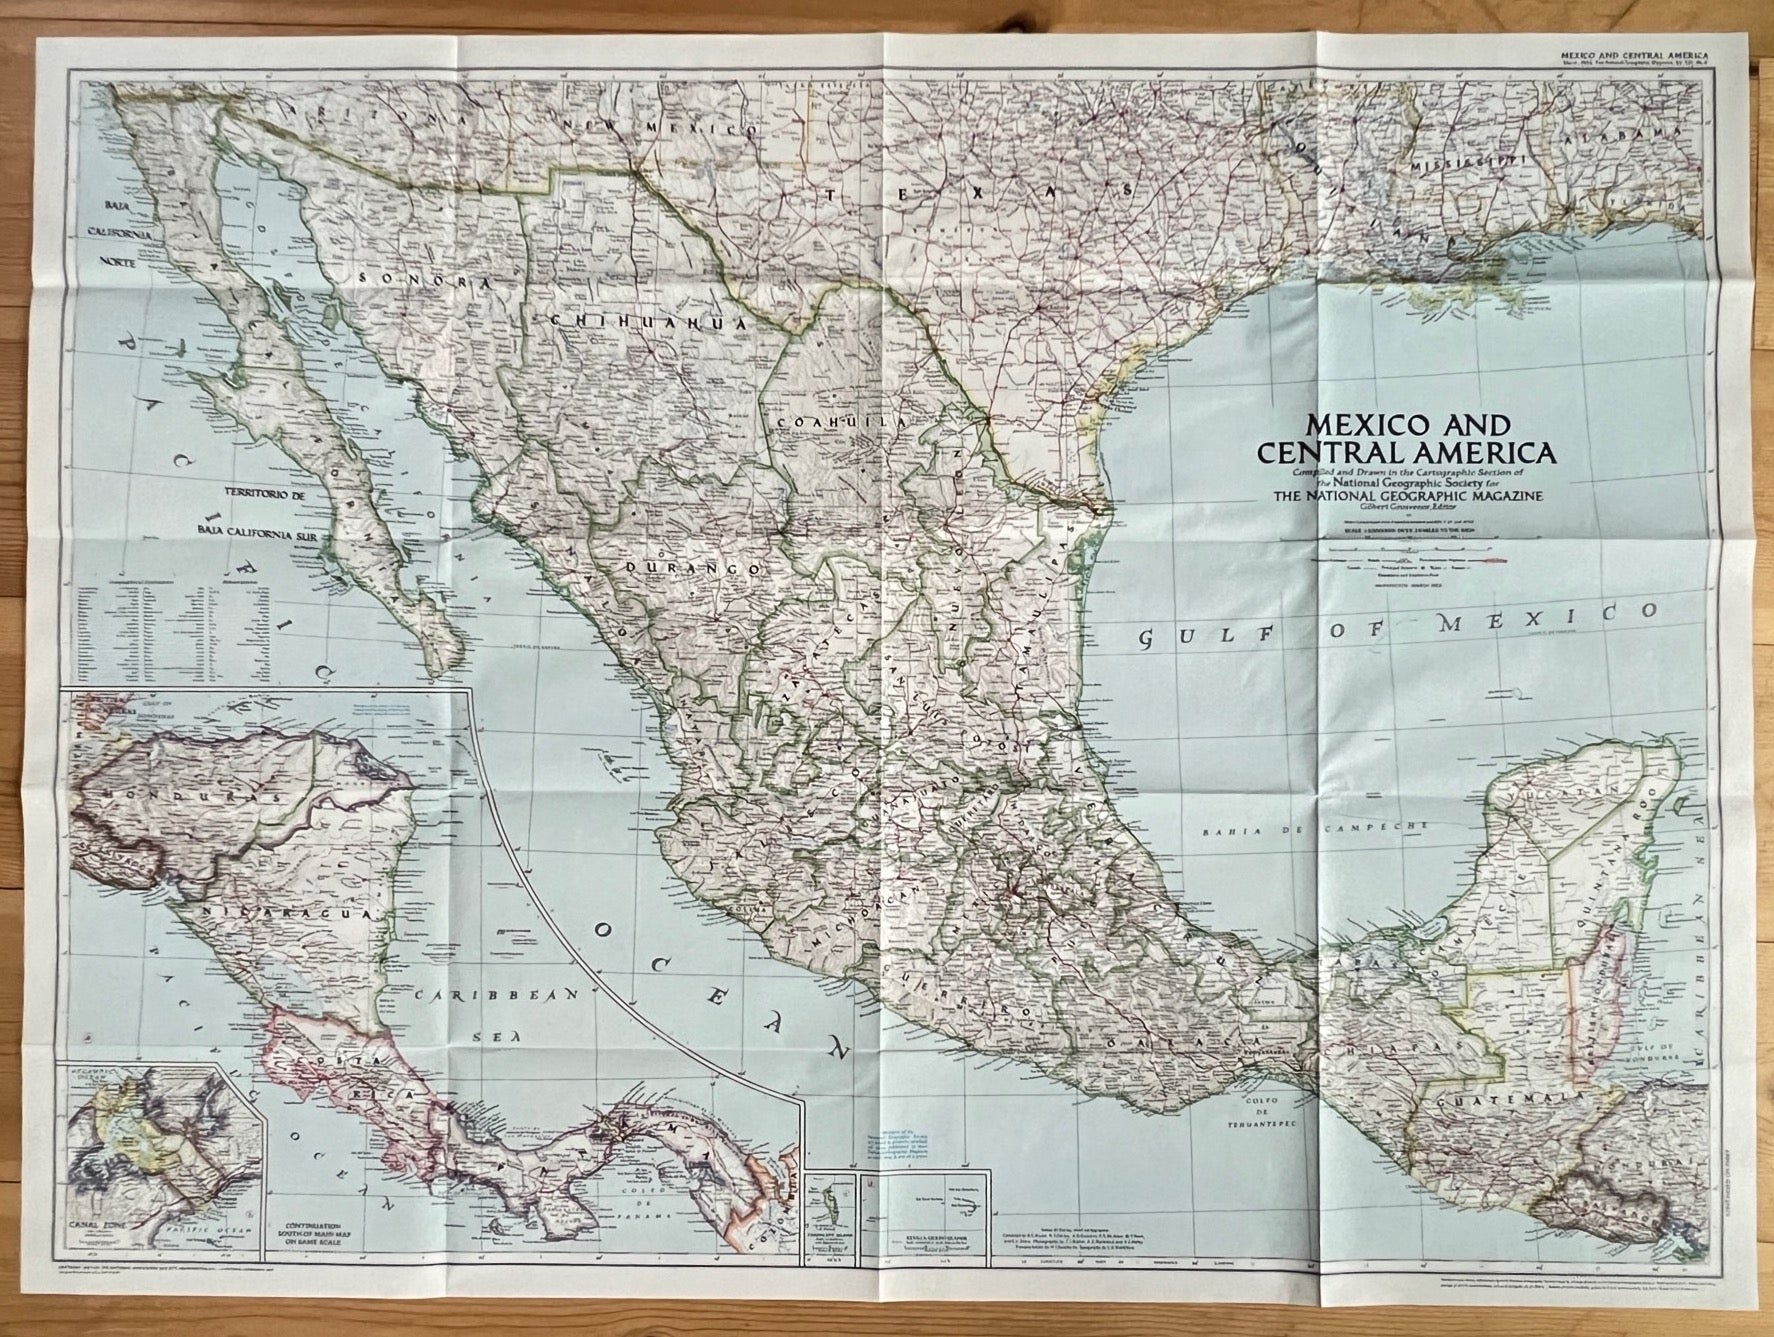 Vintage Map Print - America - Mexico and Central America - Chihuahua - 1972 - Dahlströms Fine Art